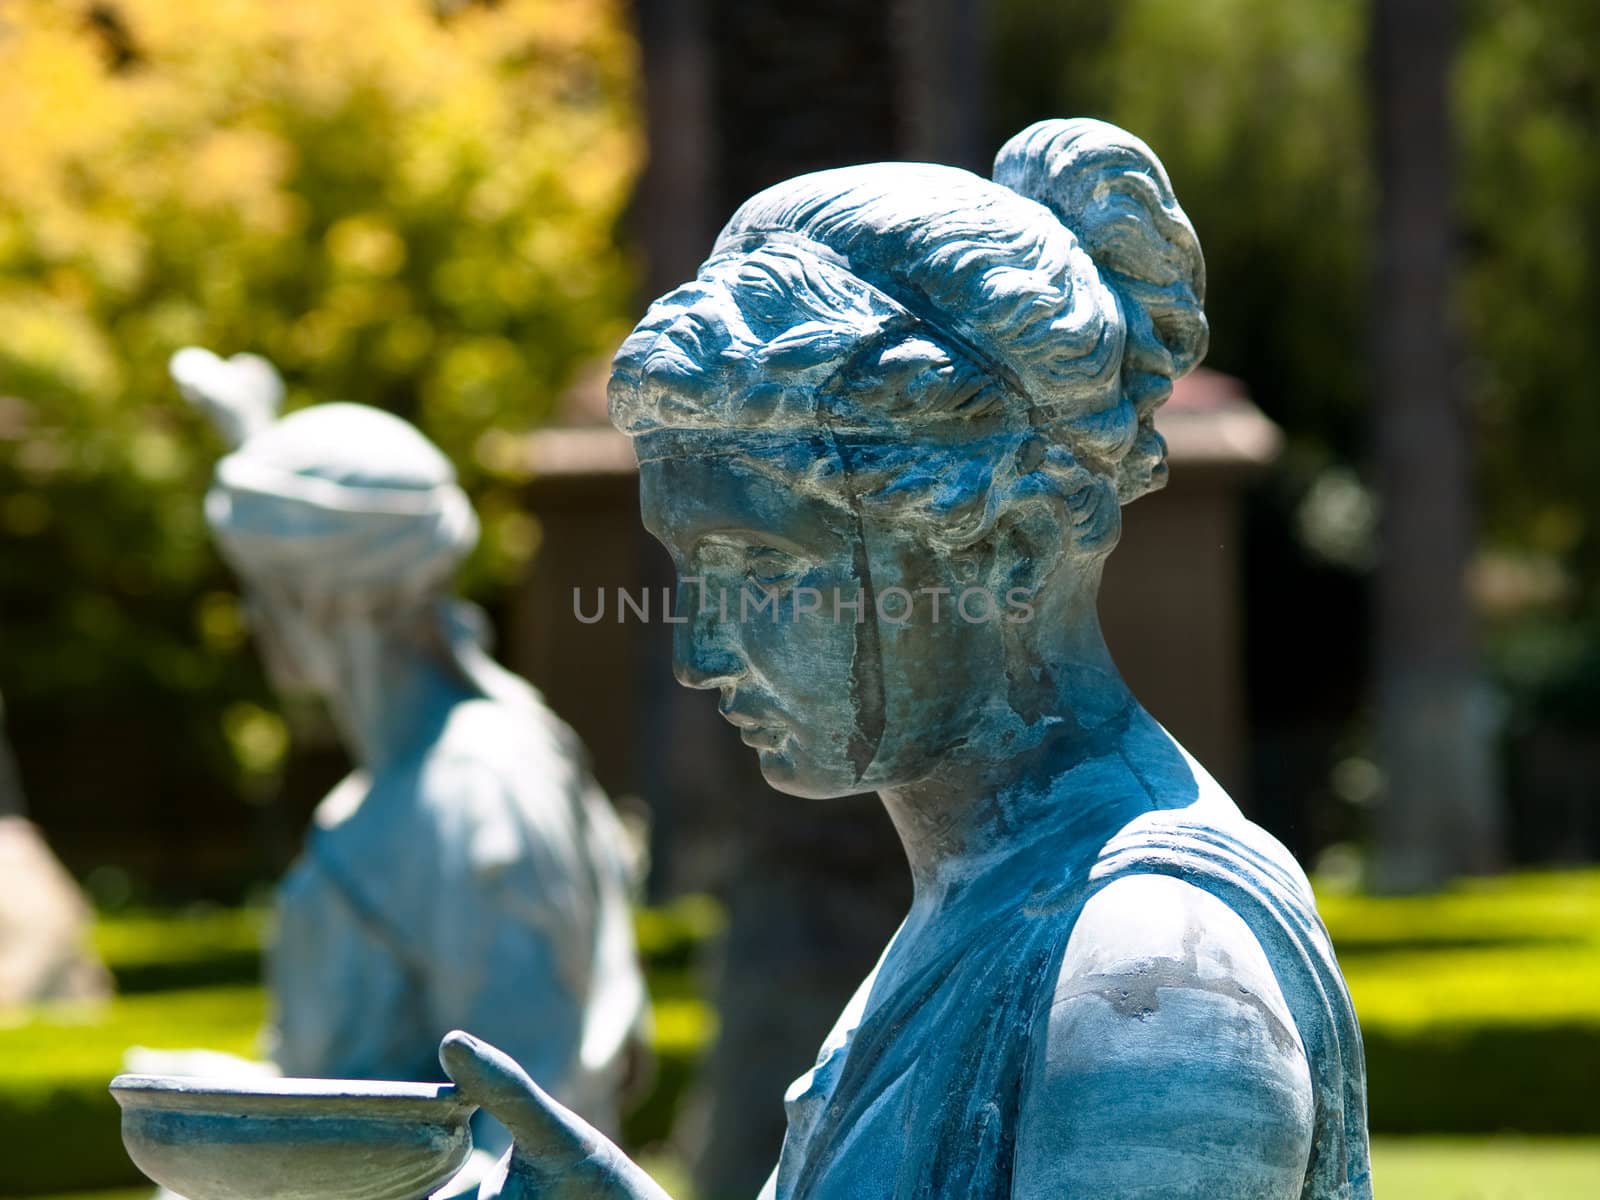 Bronze statues in a garden, both woman and man